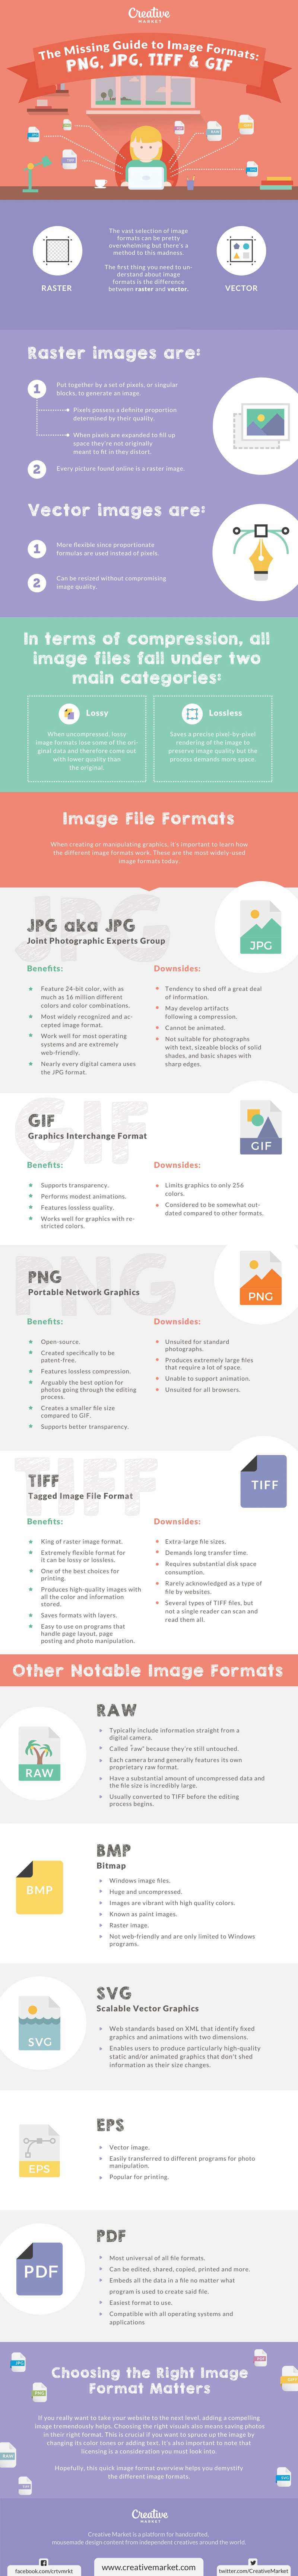 image-formats-missing-guide